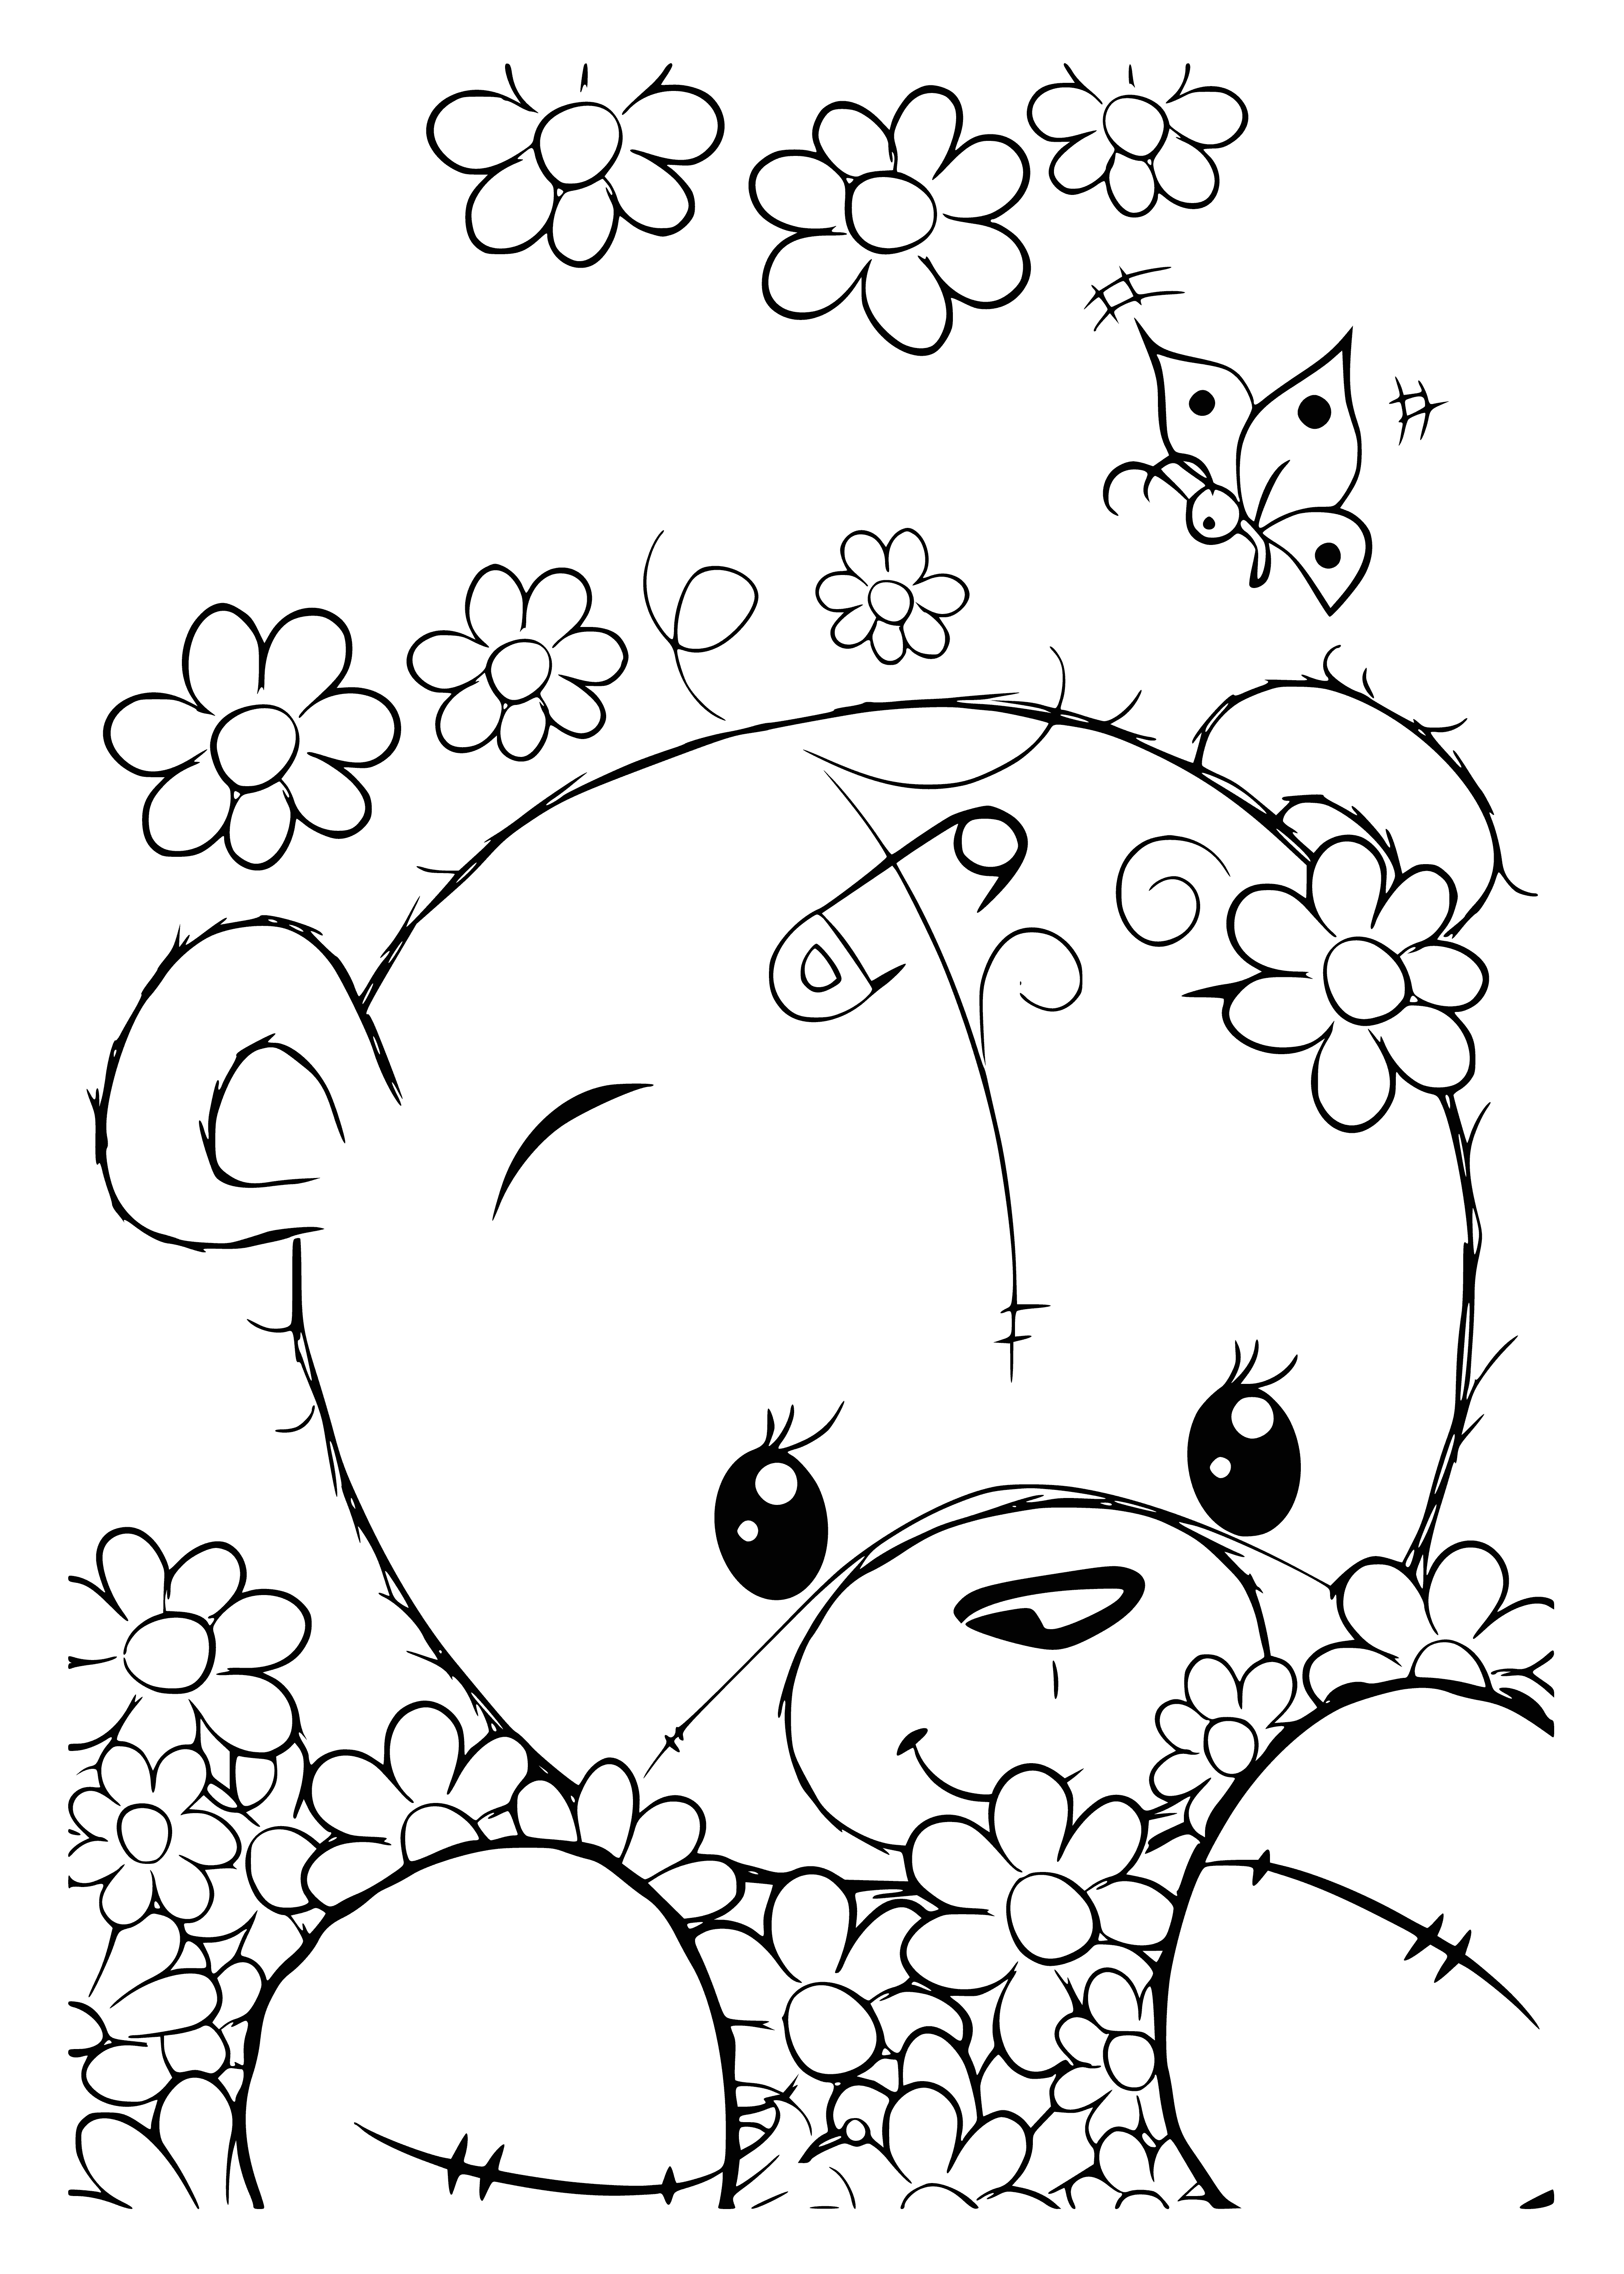 Teddy bear with daisies coloring page